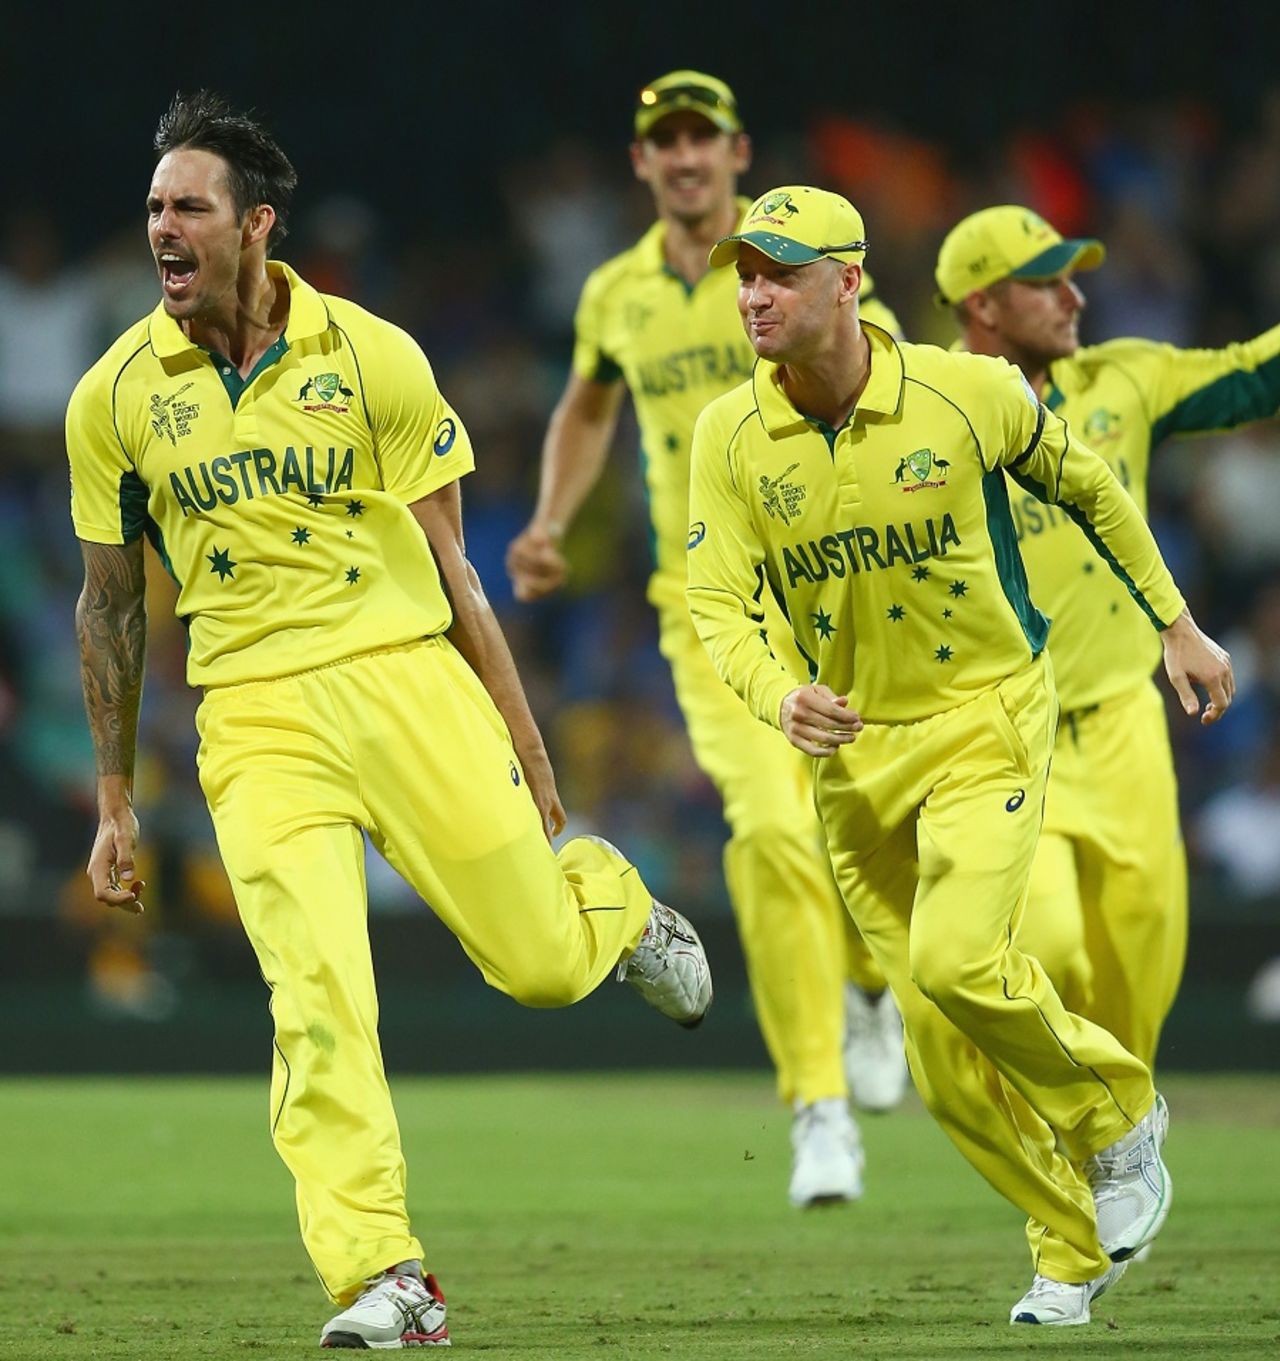 Can't stop me: Mitchell Johnson sets off after bouncing out Virat Kohli, Australia v India, World Cup 2015, 2nd semi-final, Sydney, March 26, 2015